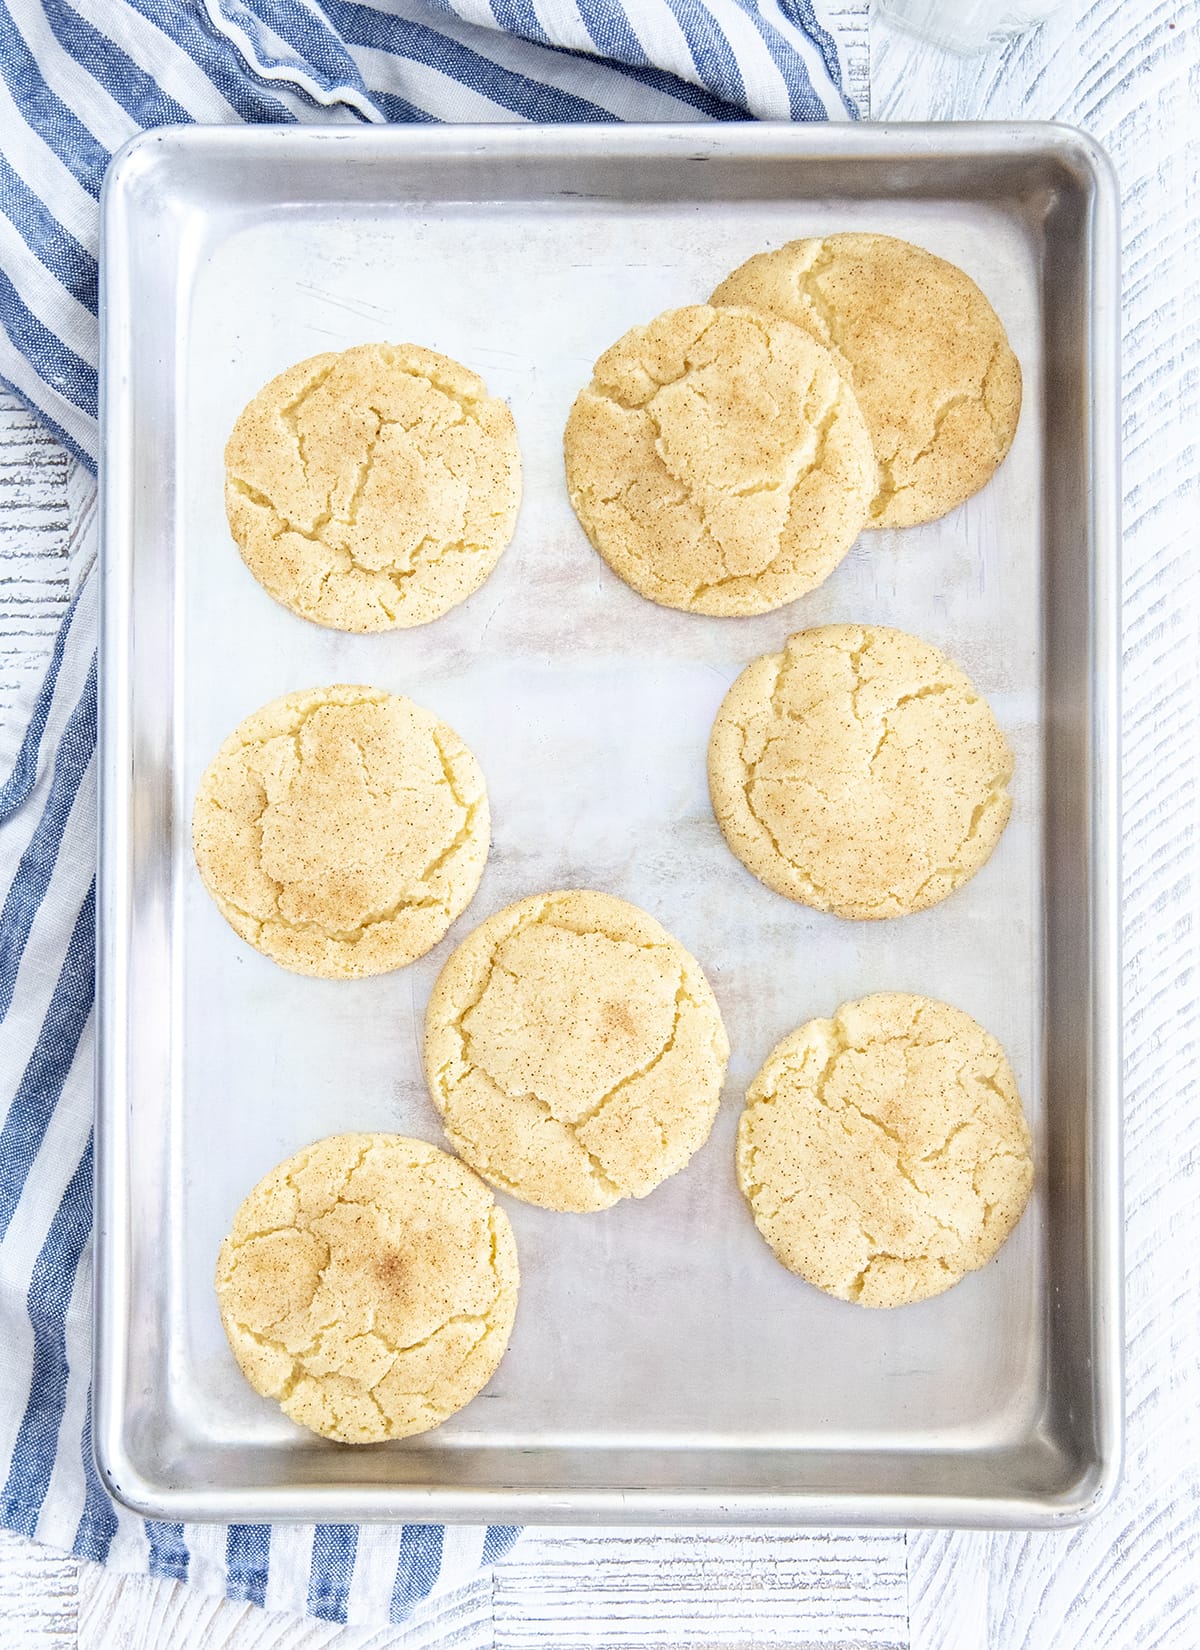 A baking pan with snickerdoodle cookies on it.